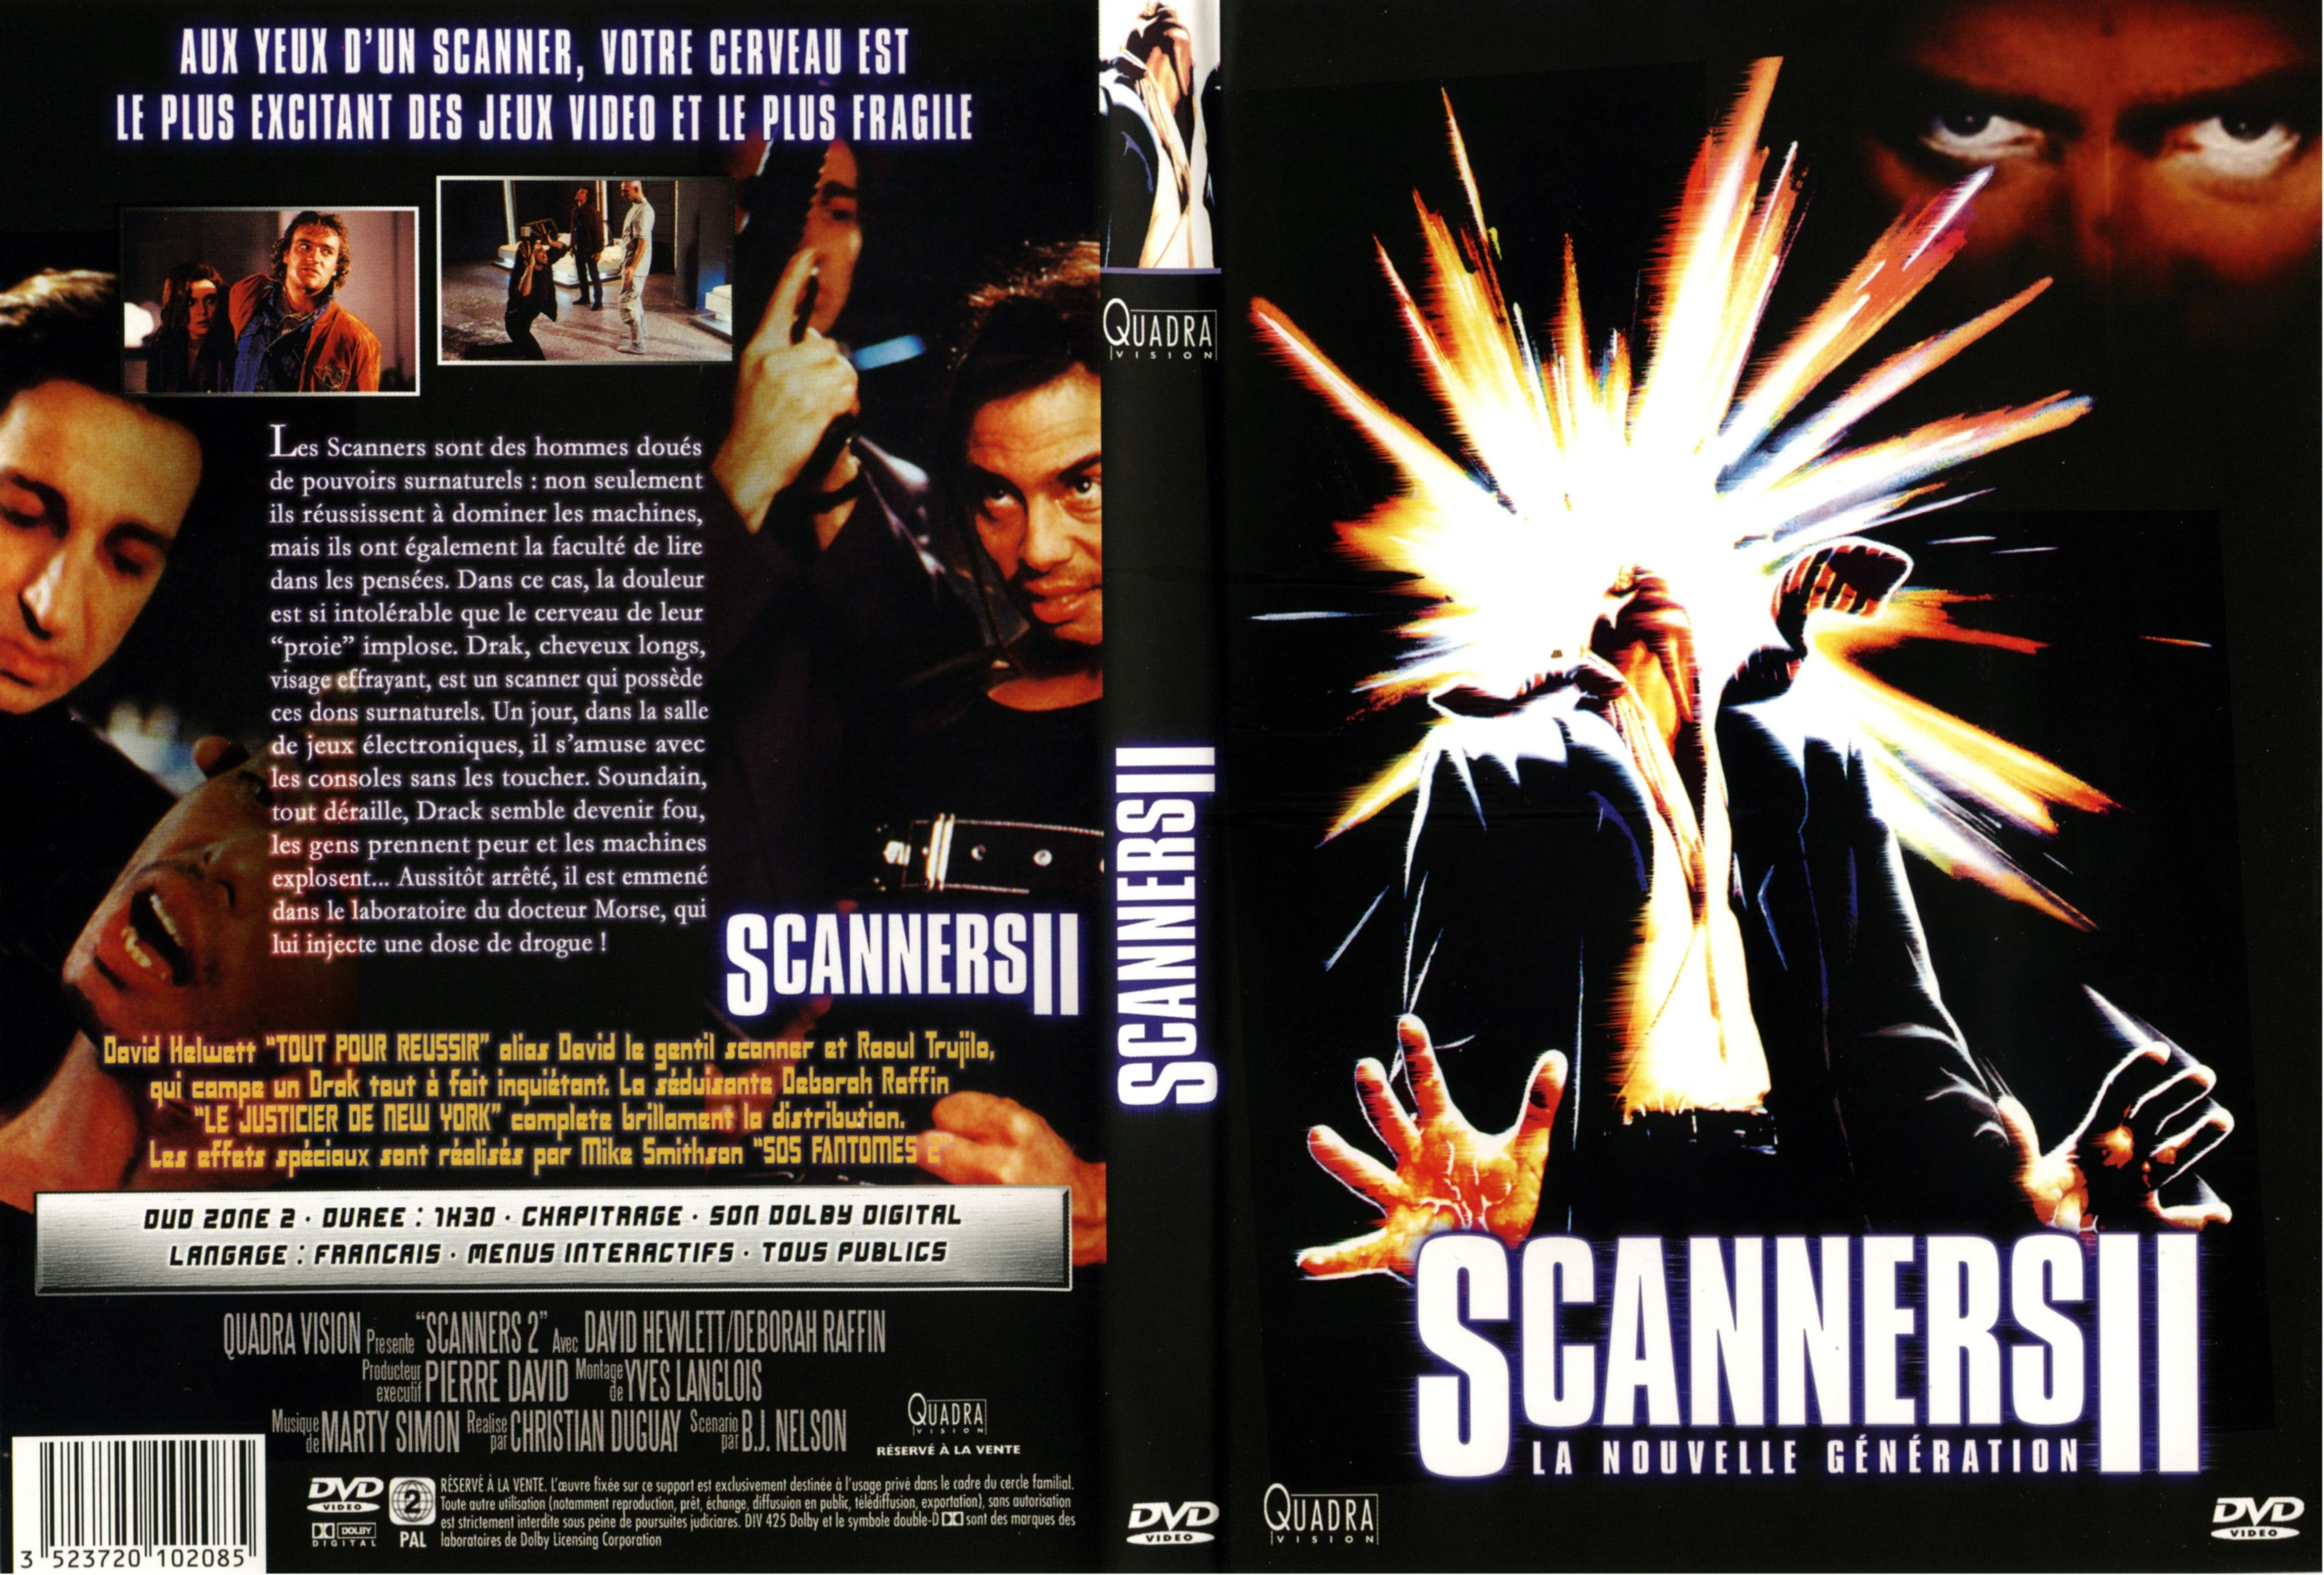 Jaquette DVD Scanners 2